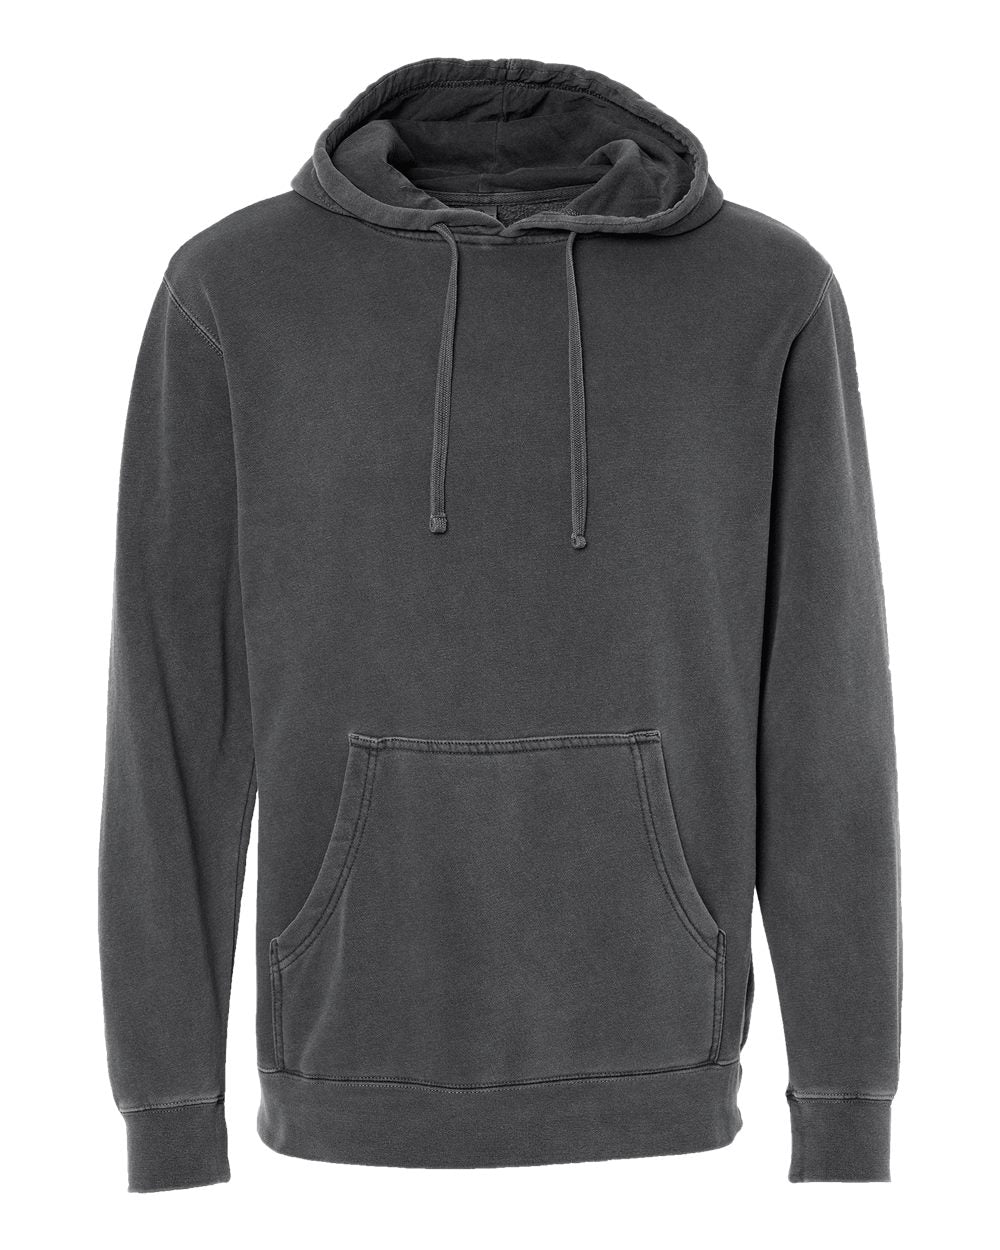 Independent Pigment-Dyed Hoodie (PRM4500) in Pigment Black